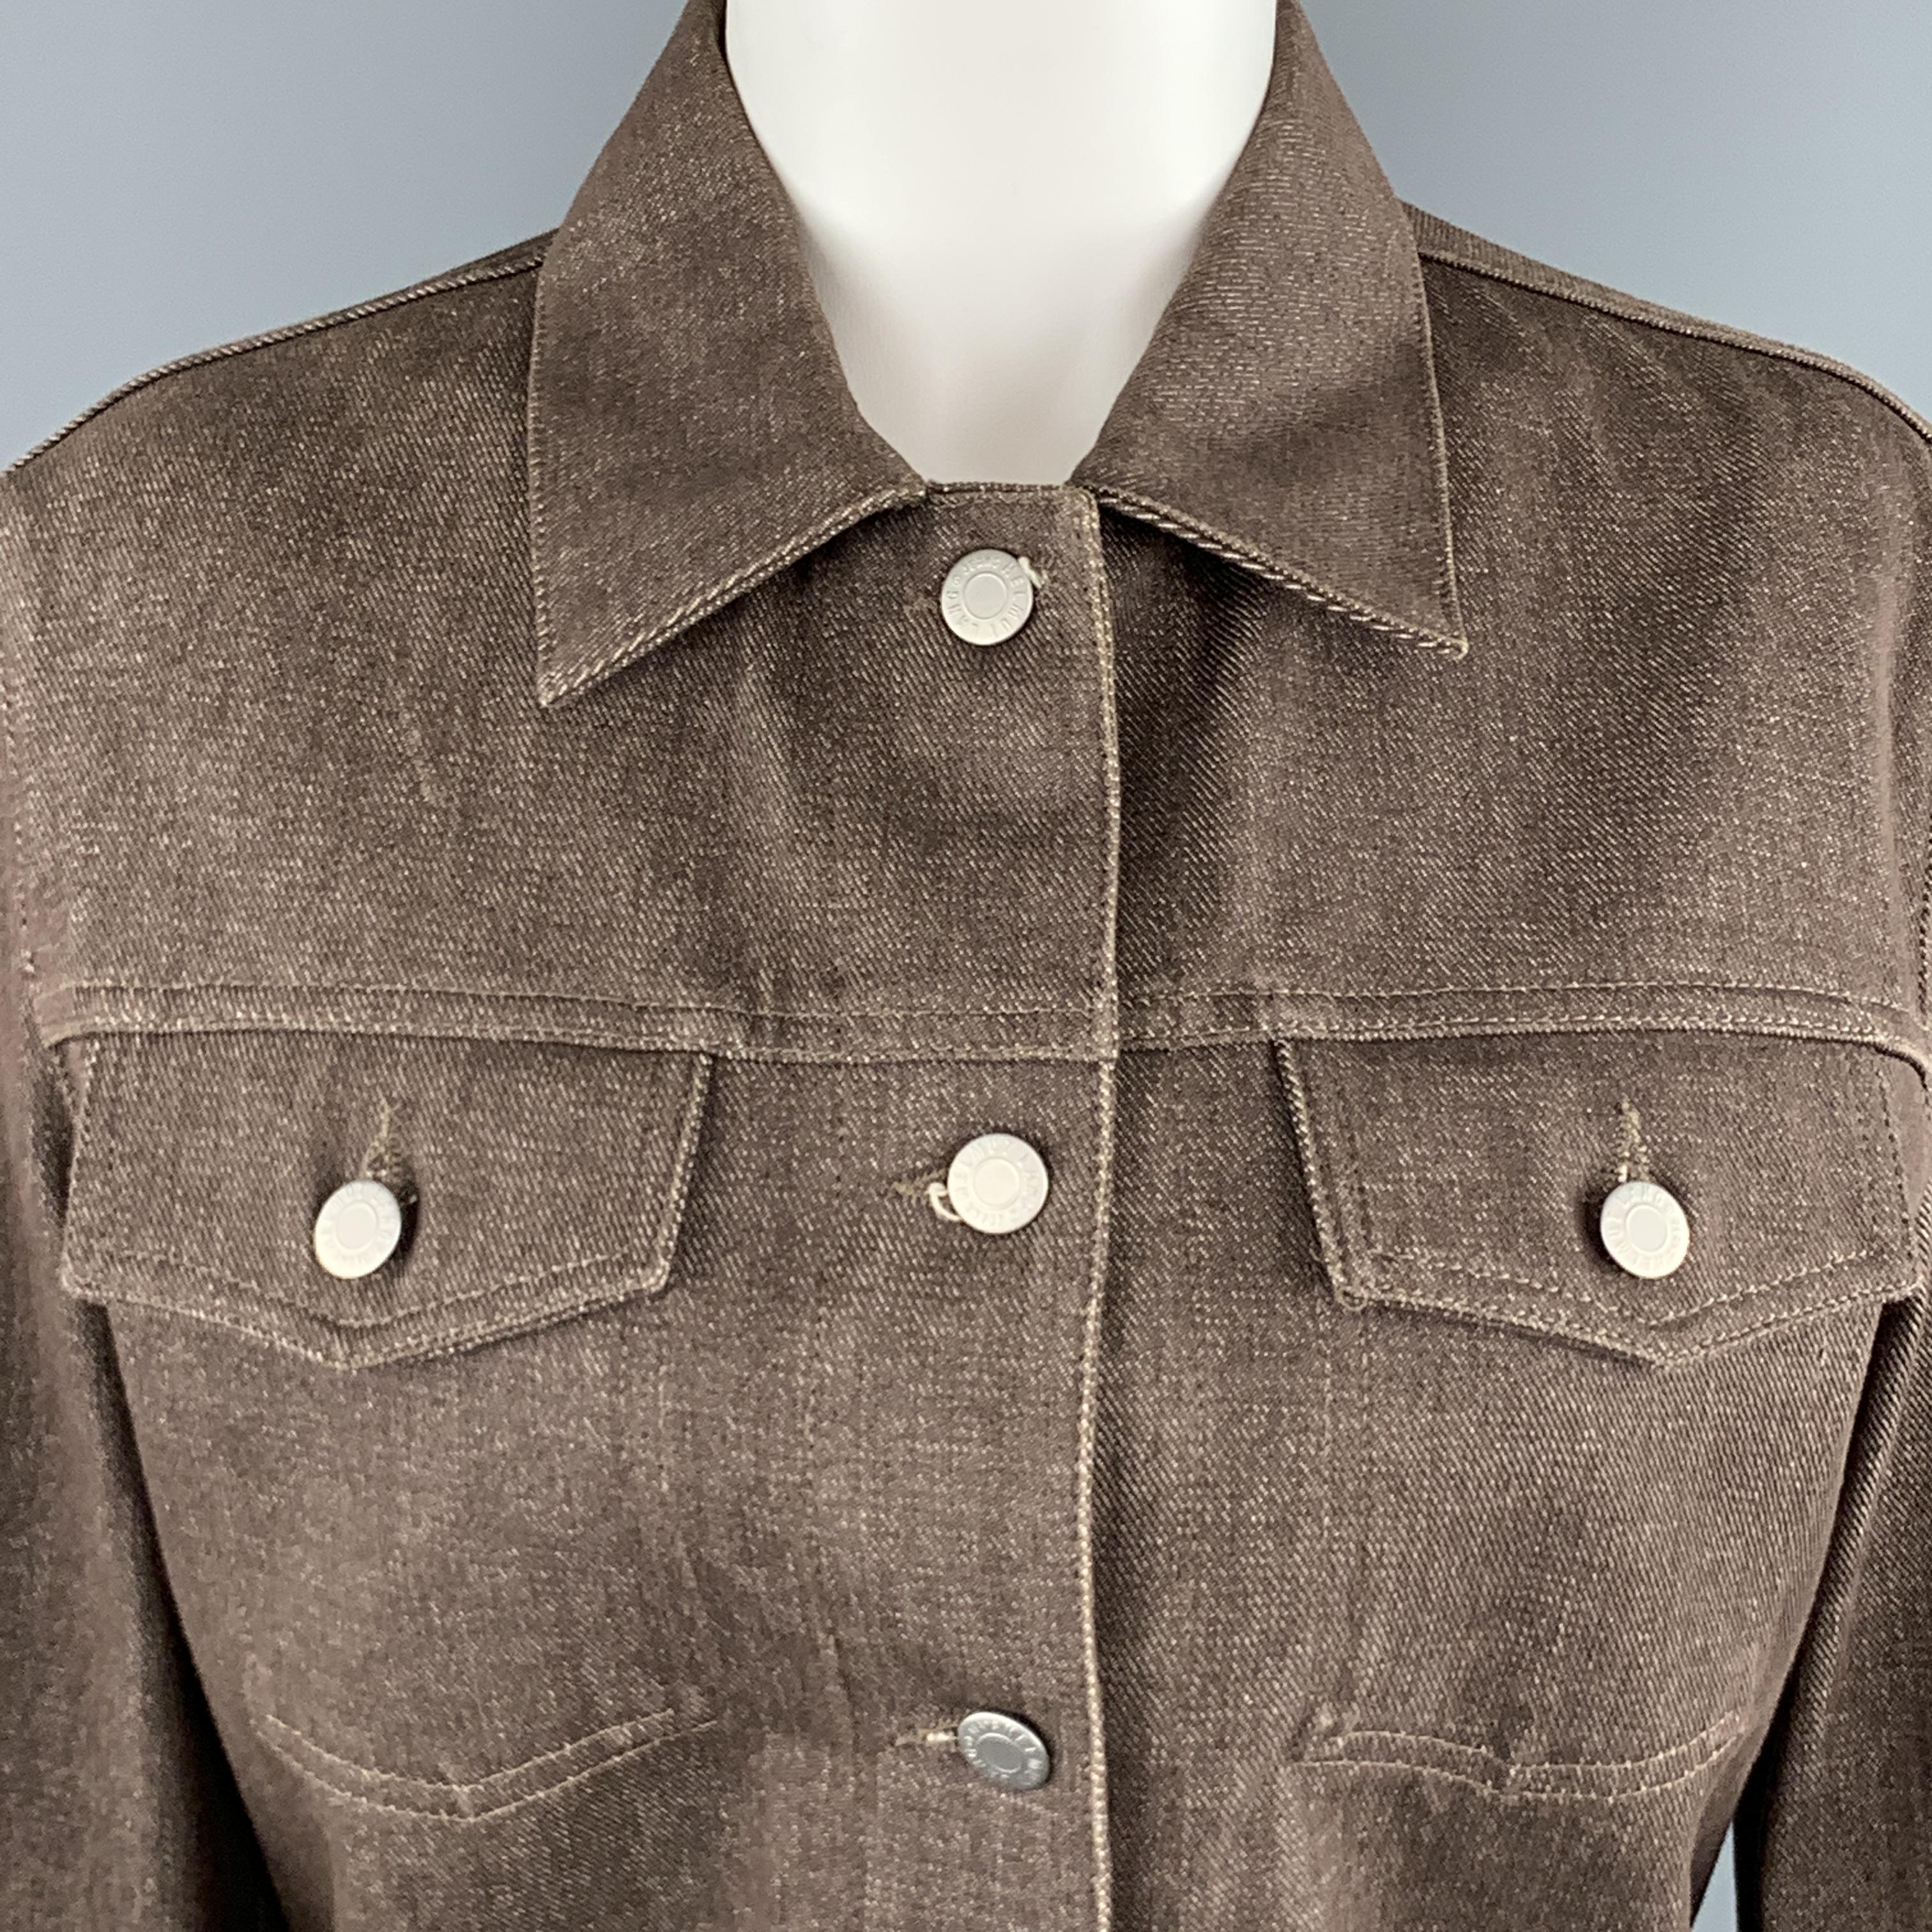 HELMUT LANG trucker jacket comes in brown raw denim with a pointed collar, patch flap pockets, and silver tone engraved buttons. Made in Italy.

Excellent Pre-Owned Condition.
Marked: M

Measurements:

Shoulder: 16 in.
Chest: 39 in.
Sleeve: 26